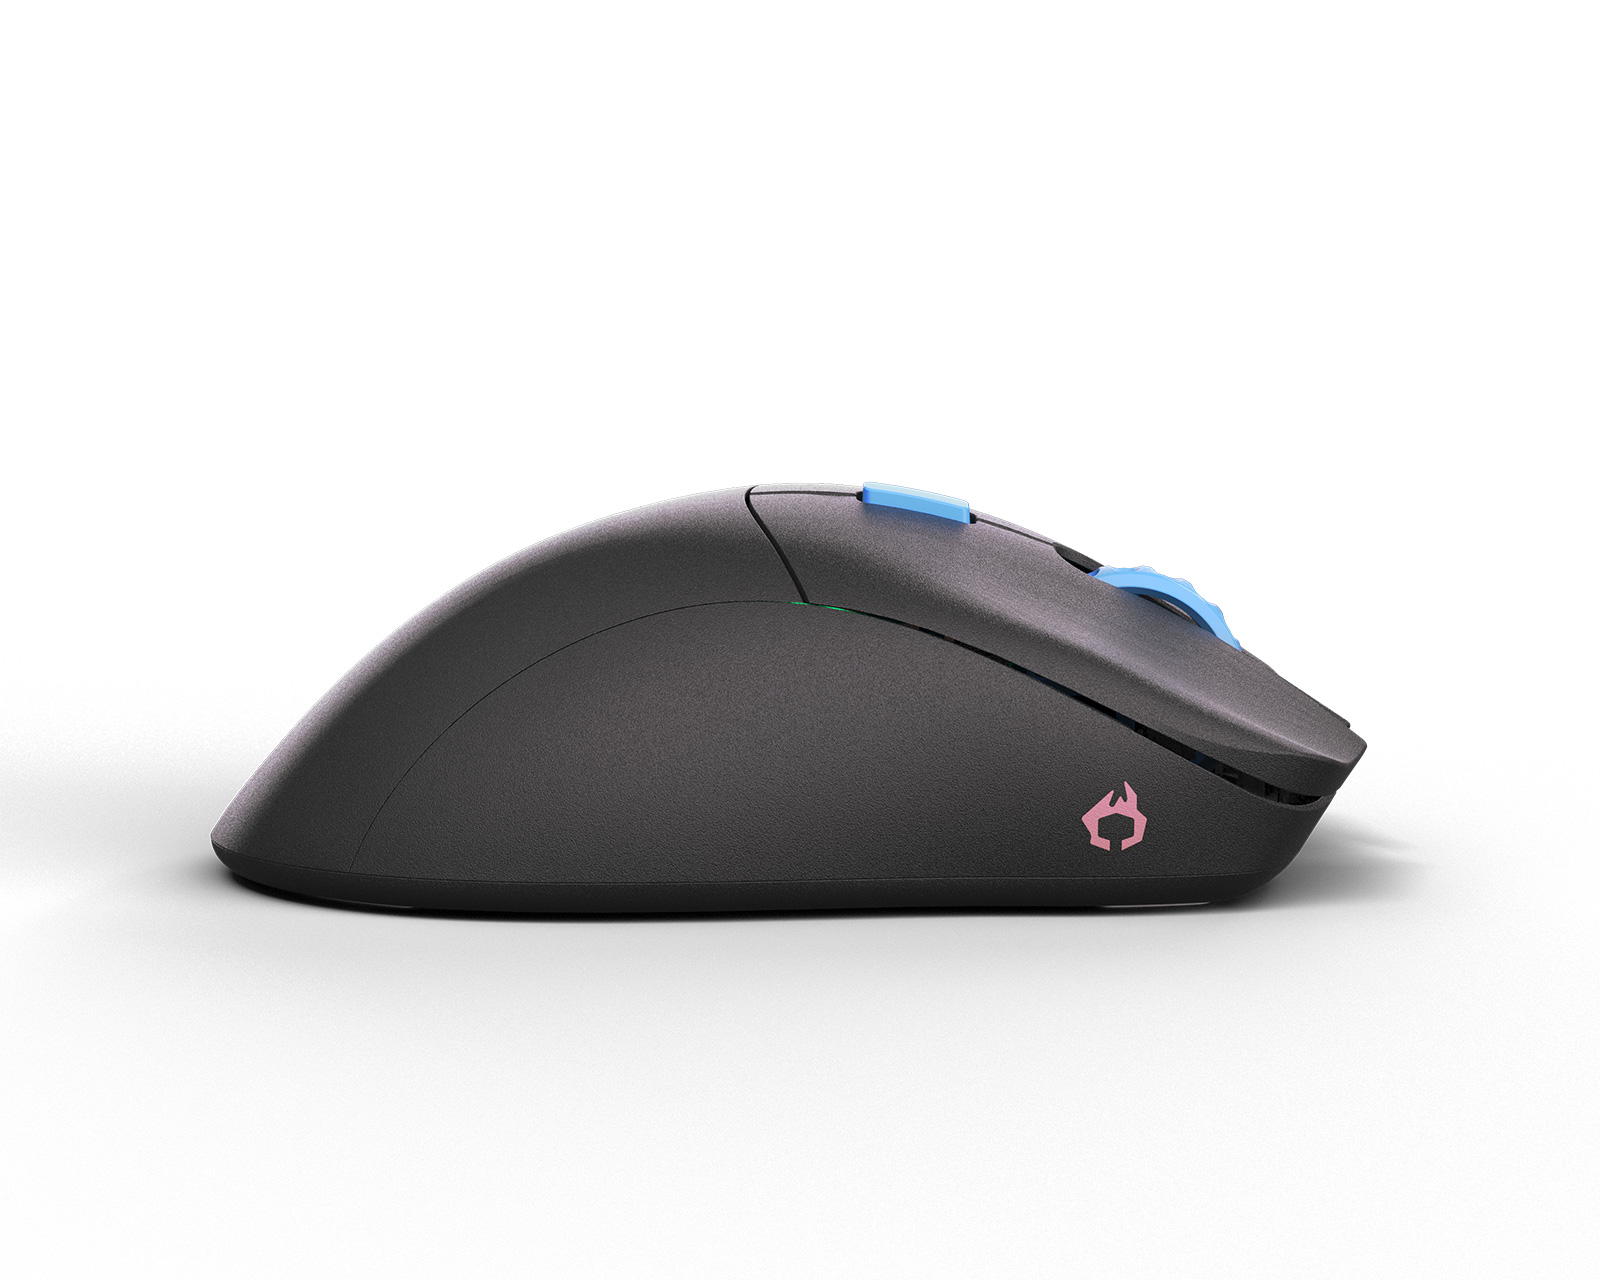 Glorious Model D PRO Wireless Gaming Mouse - Vice - Forge Limited